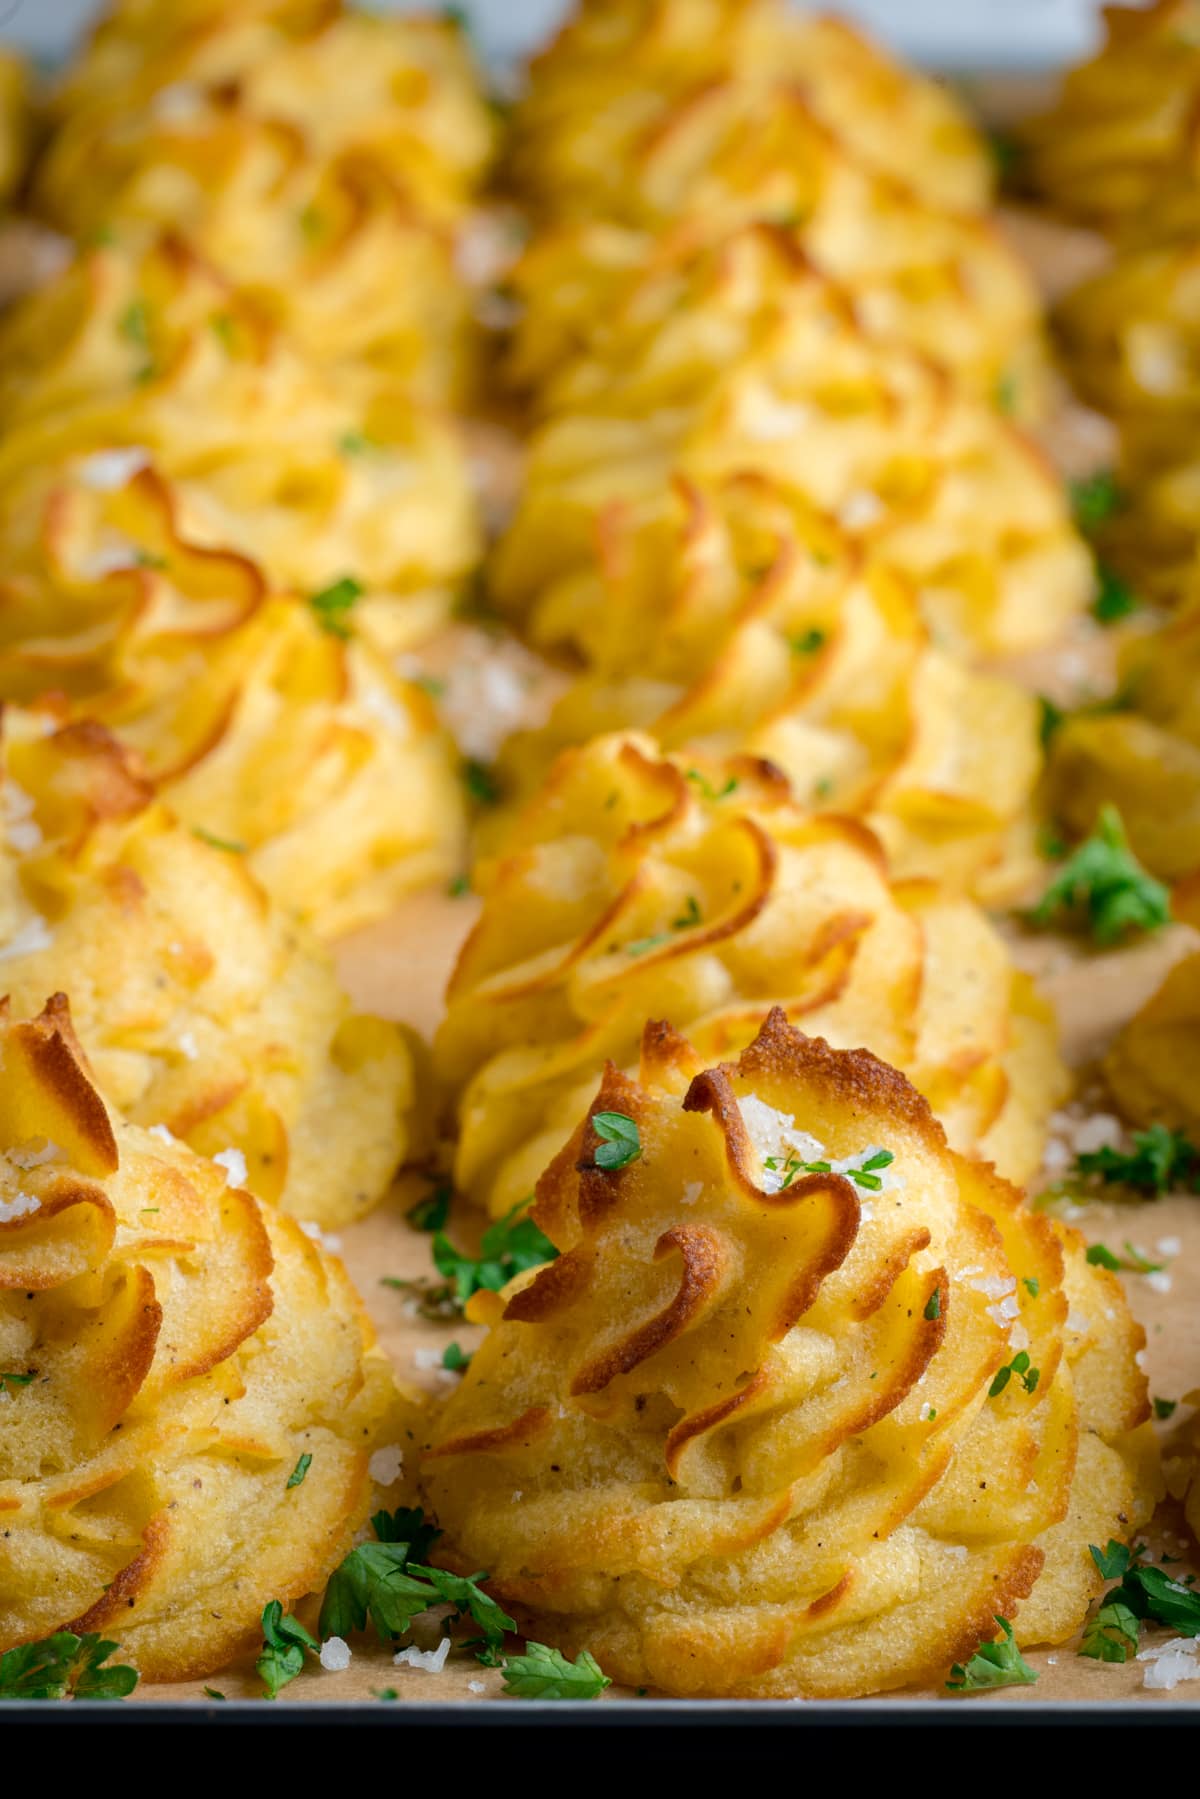 Close up image of a tray full of piped, baked, Duchess potatoes. The tray is lined with baking parchment. The potatoes are scattered with salt and parsley.